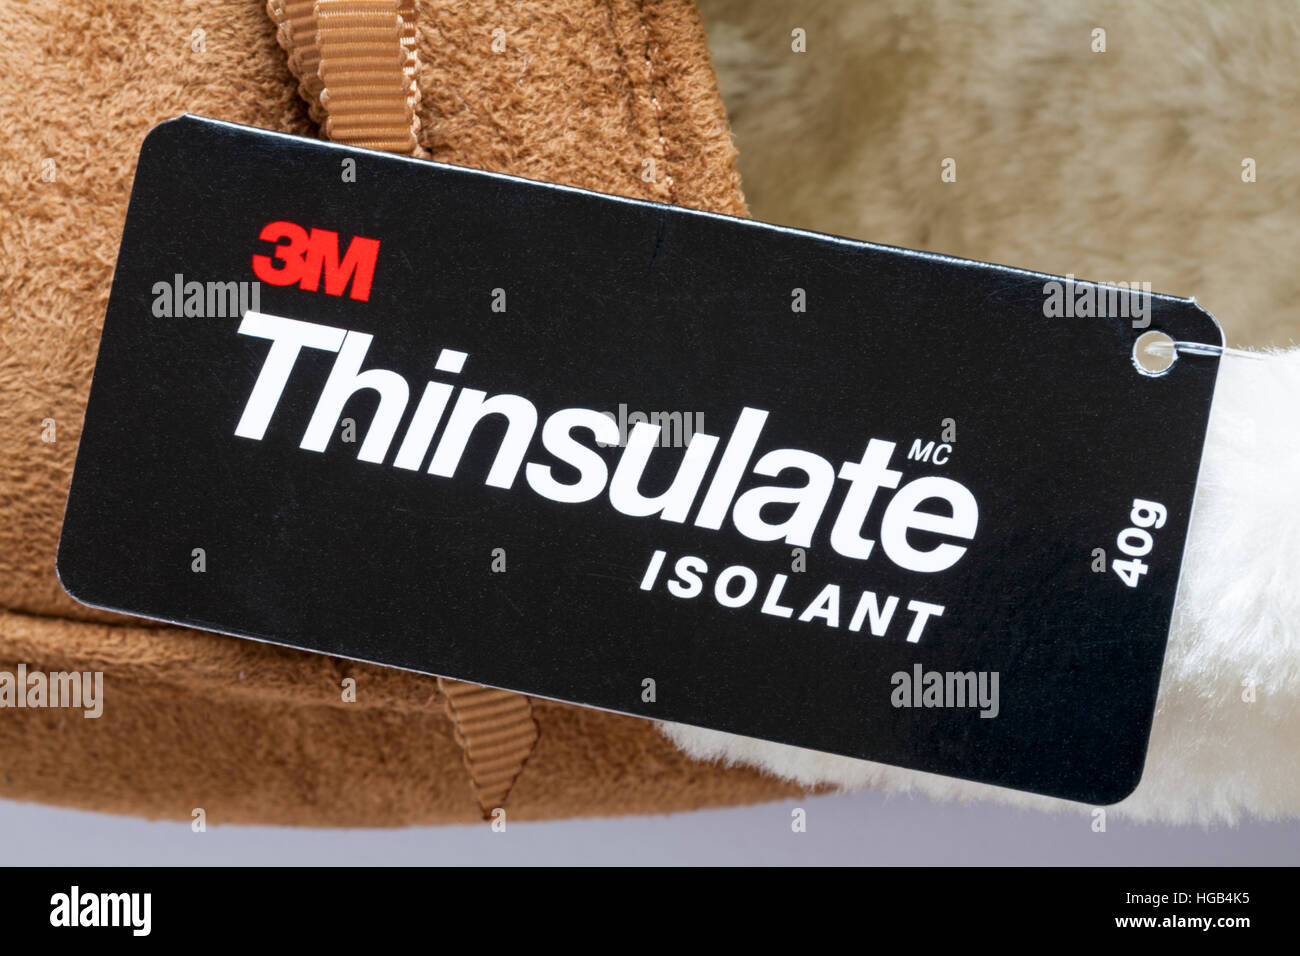 3m thinsulate isolant insulation label on slippers fotografías e ...